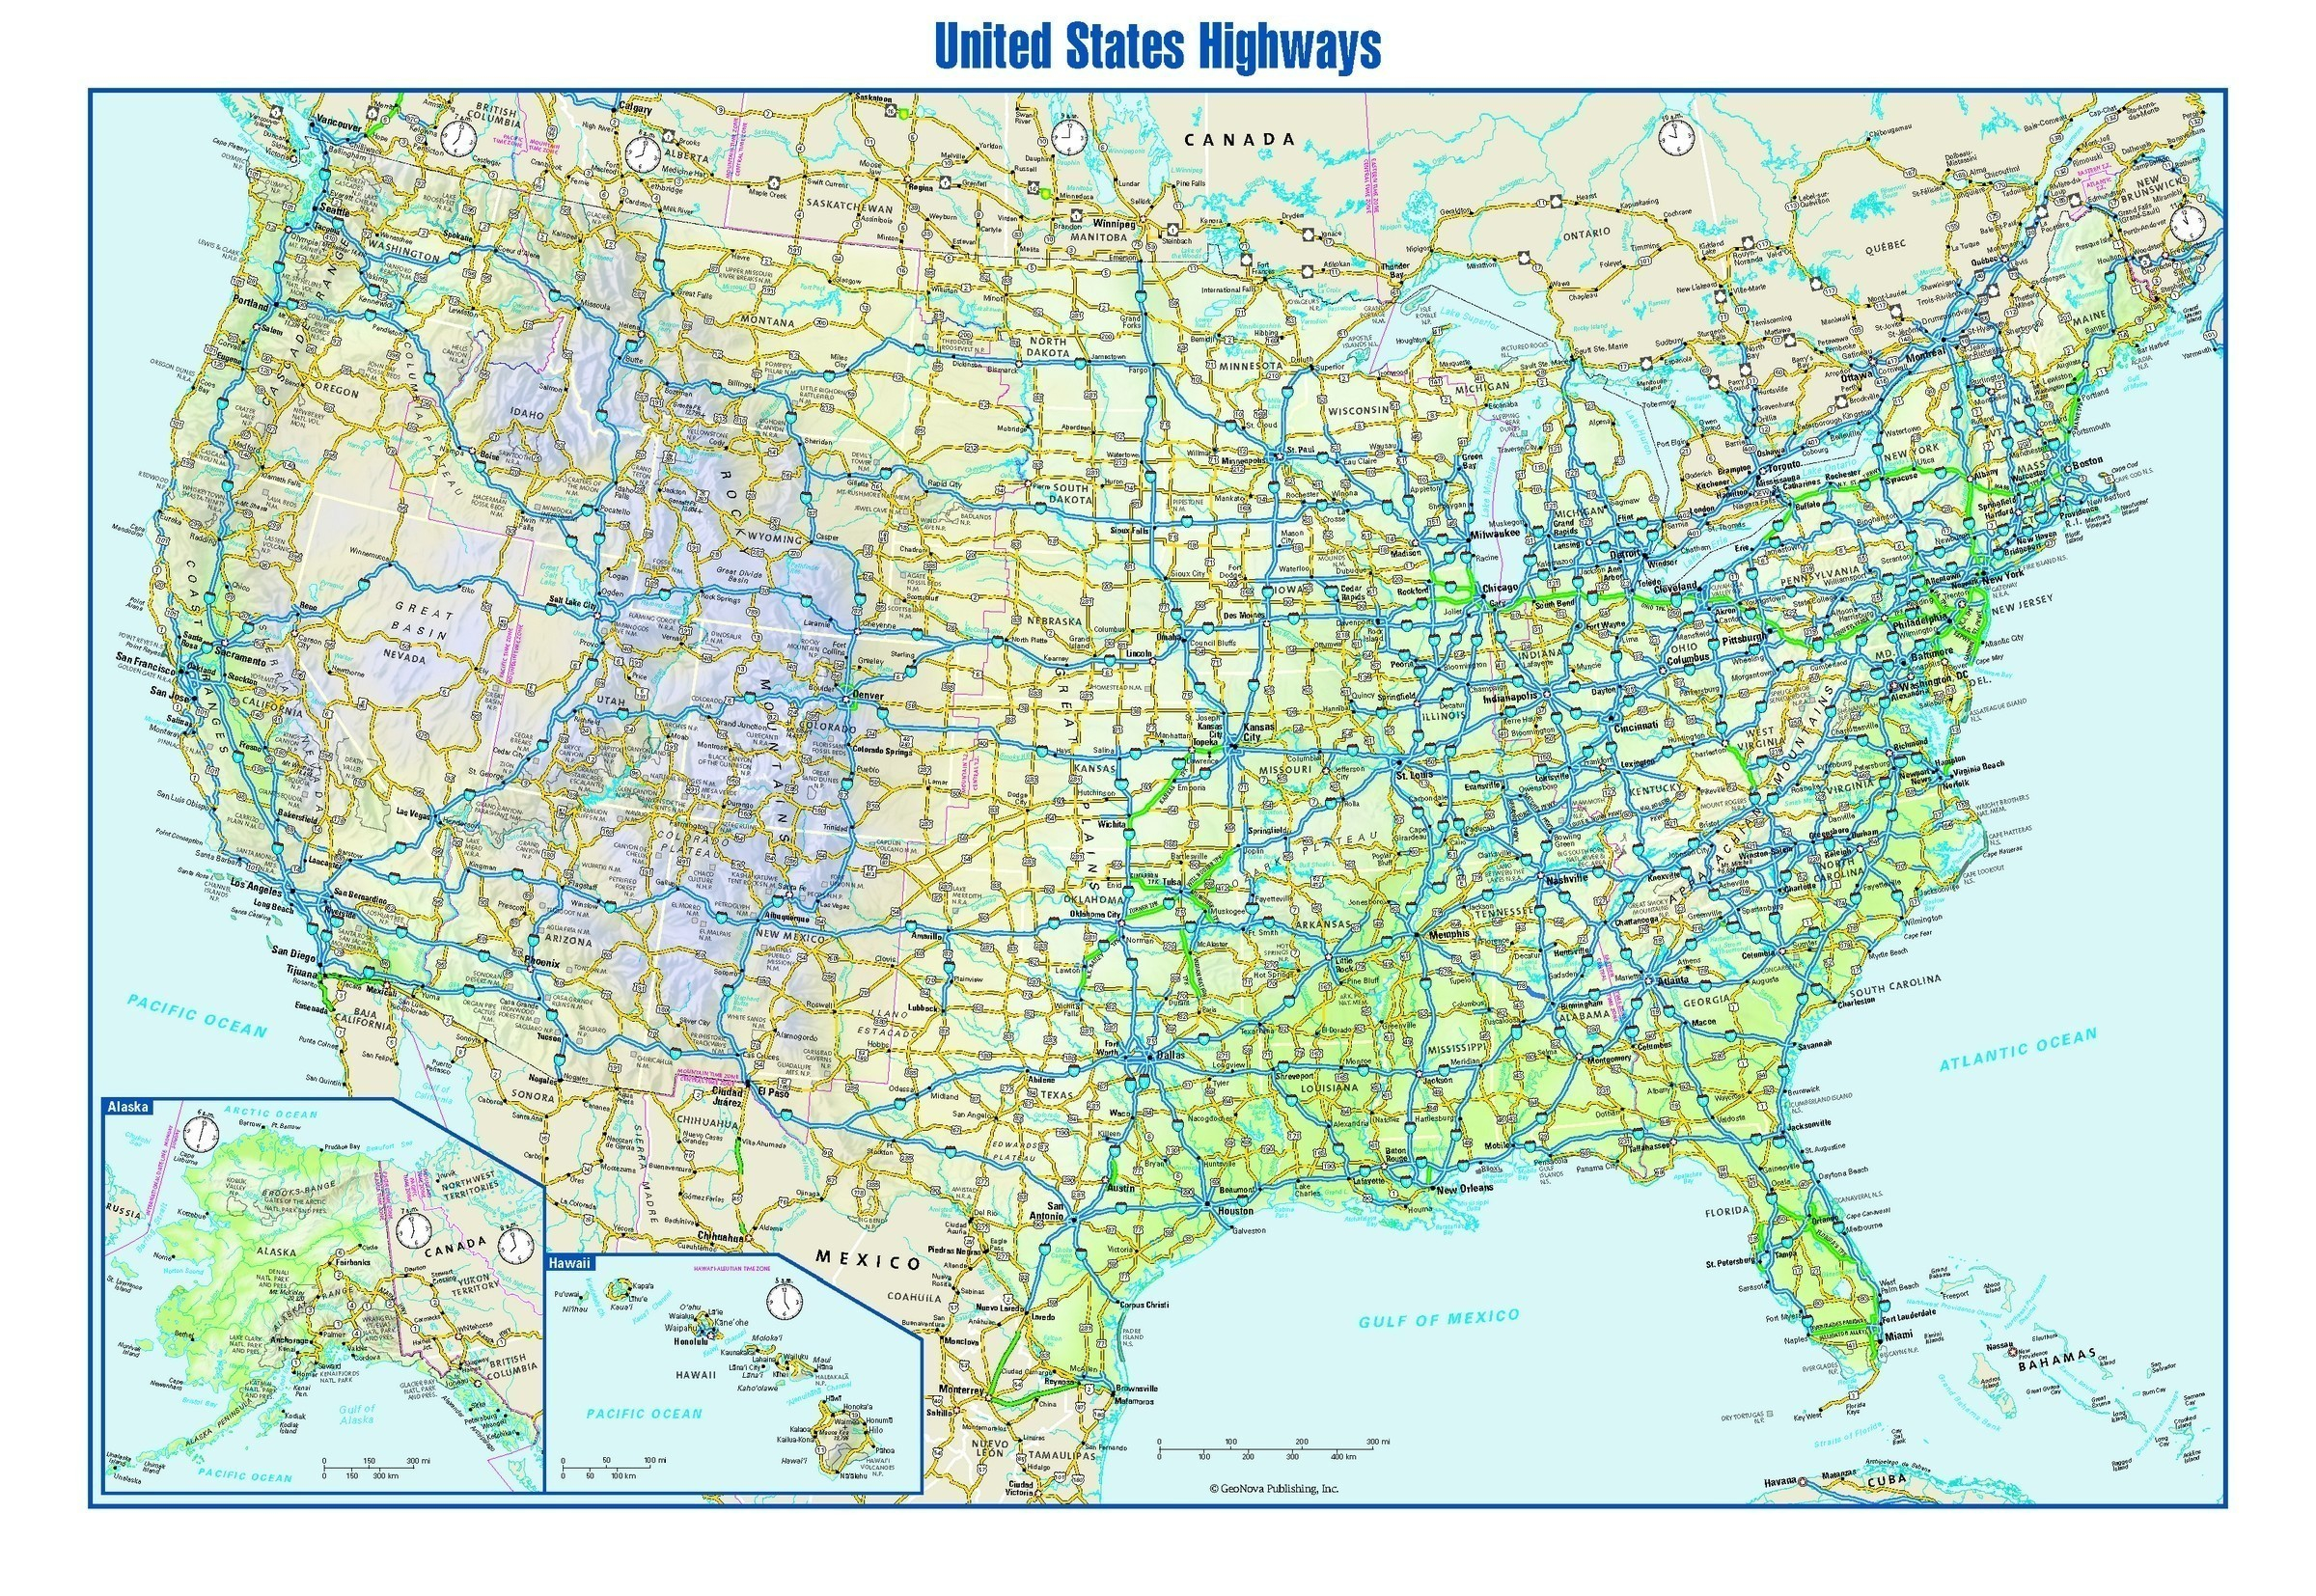 Free Printable Us Highway Map Usa Road Map Unique United States Road - Free Printable Road Maps Of The United States